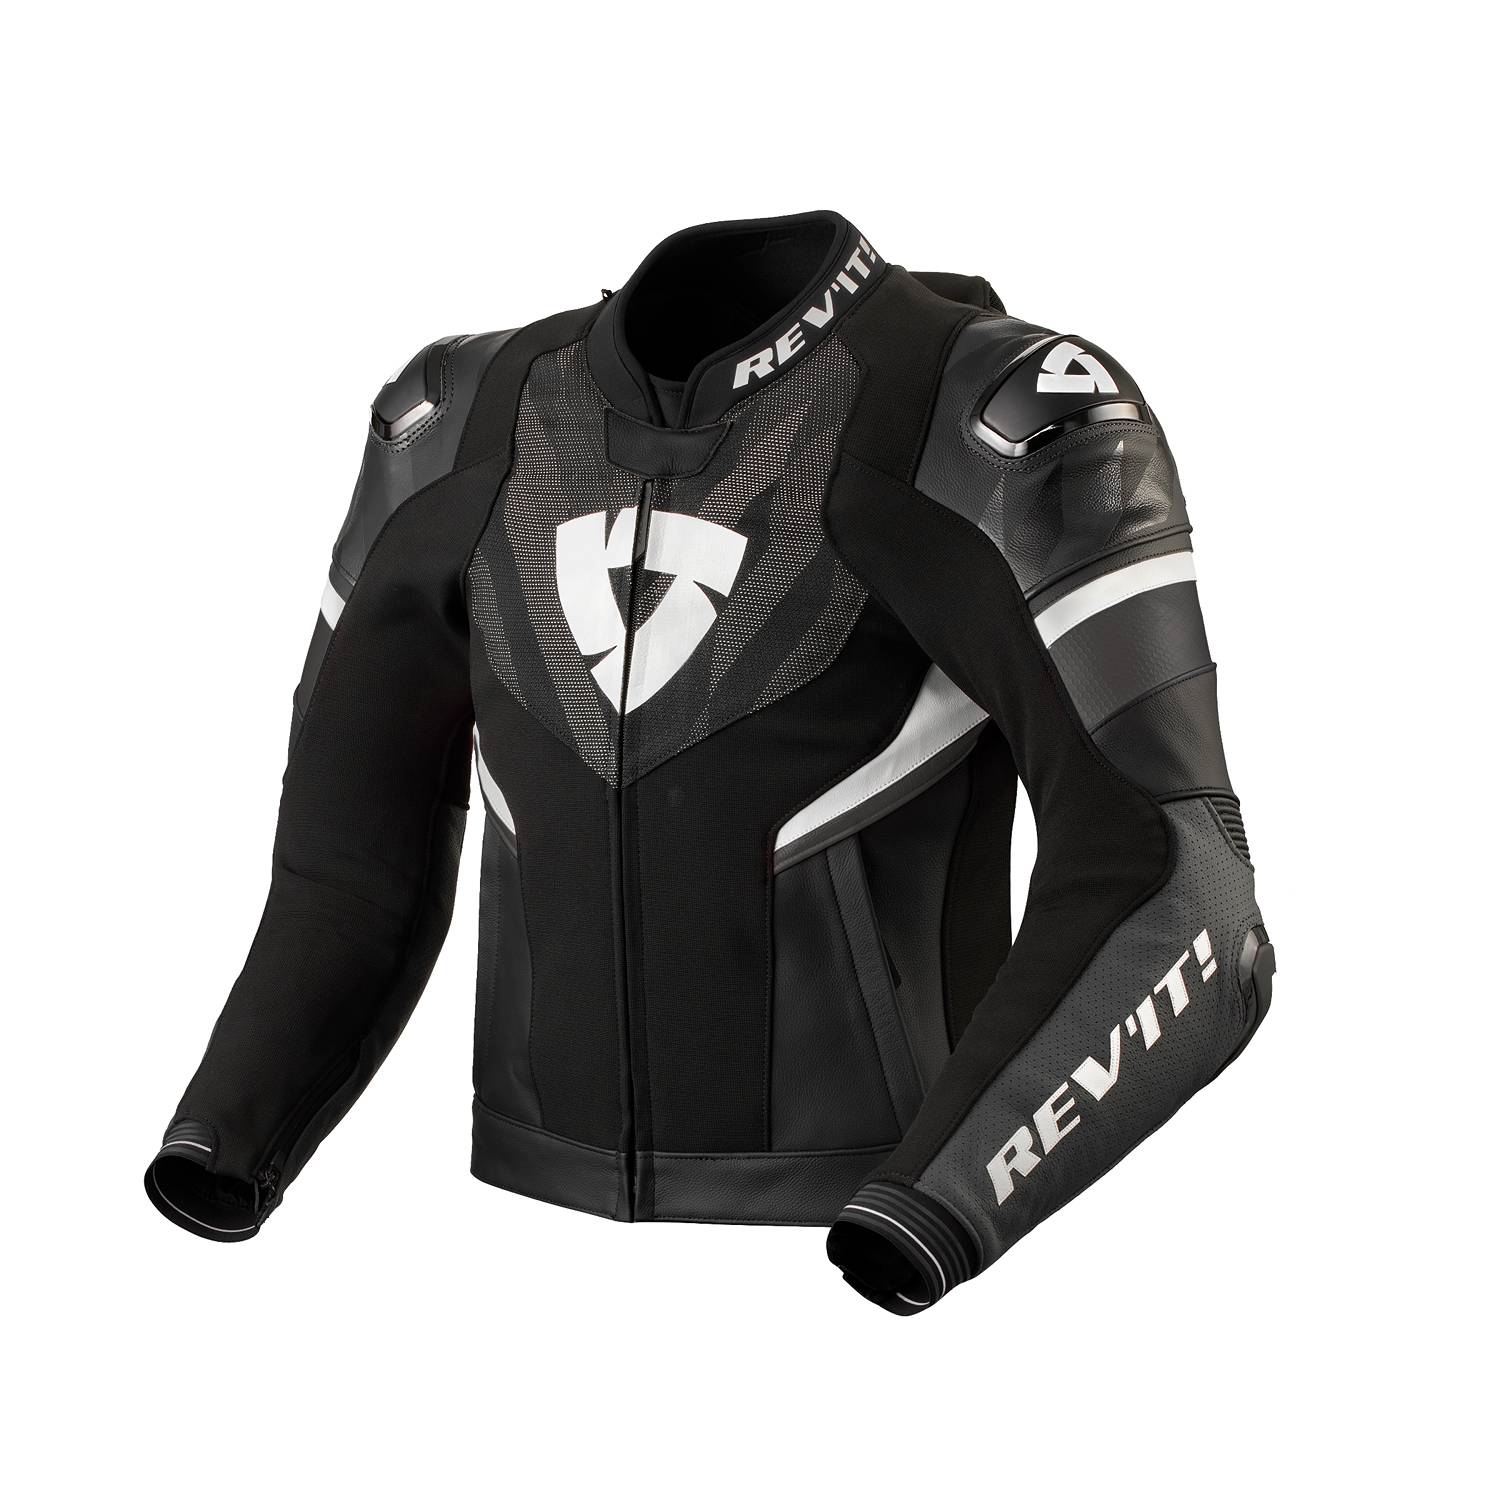 Image of REV'IT! Hyperspeed 2 Pro Veste Noir Anthracite Taille 54